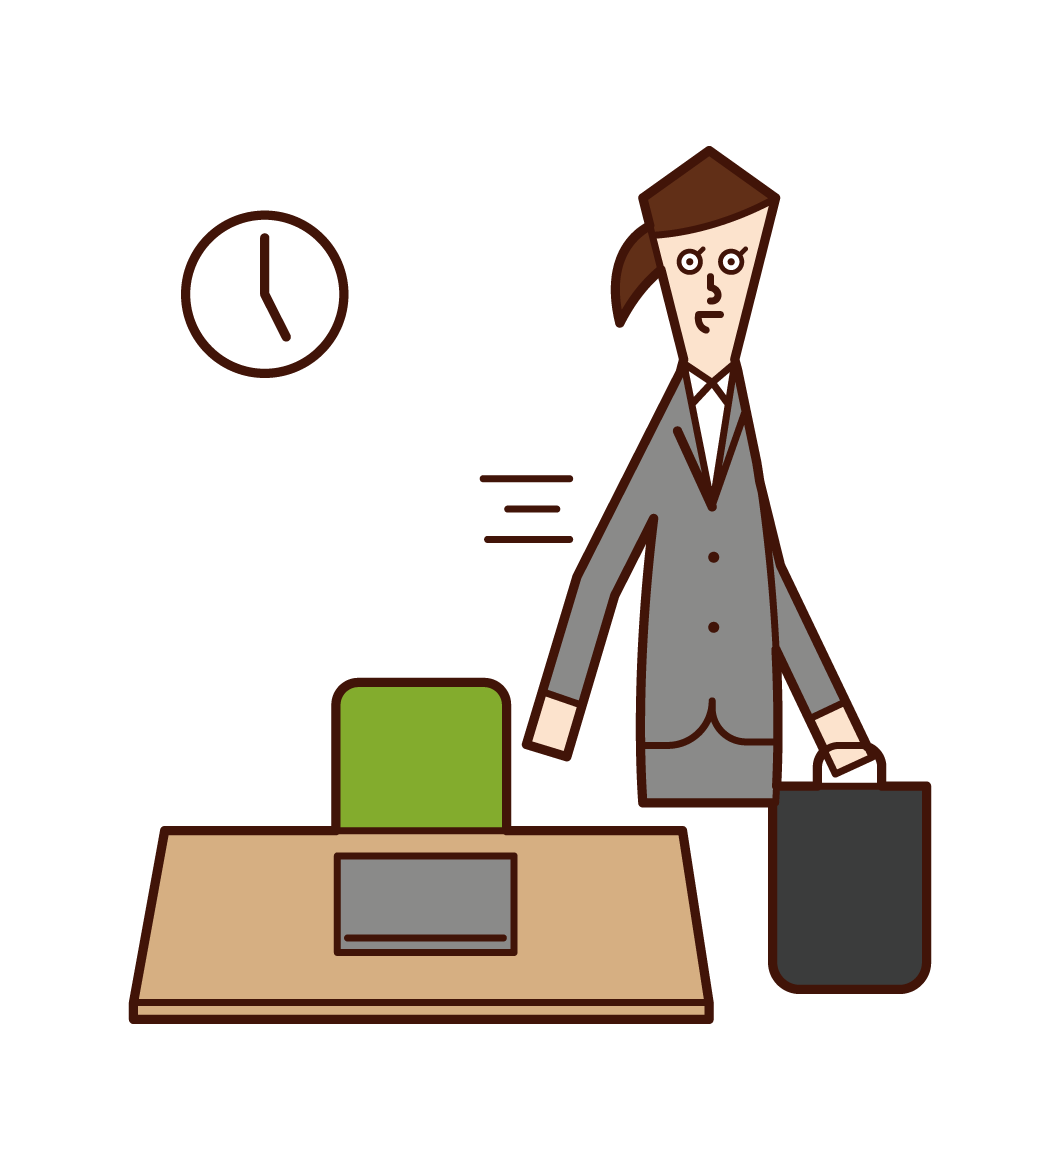 Illustration of a person (woman) forcing overtime work